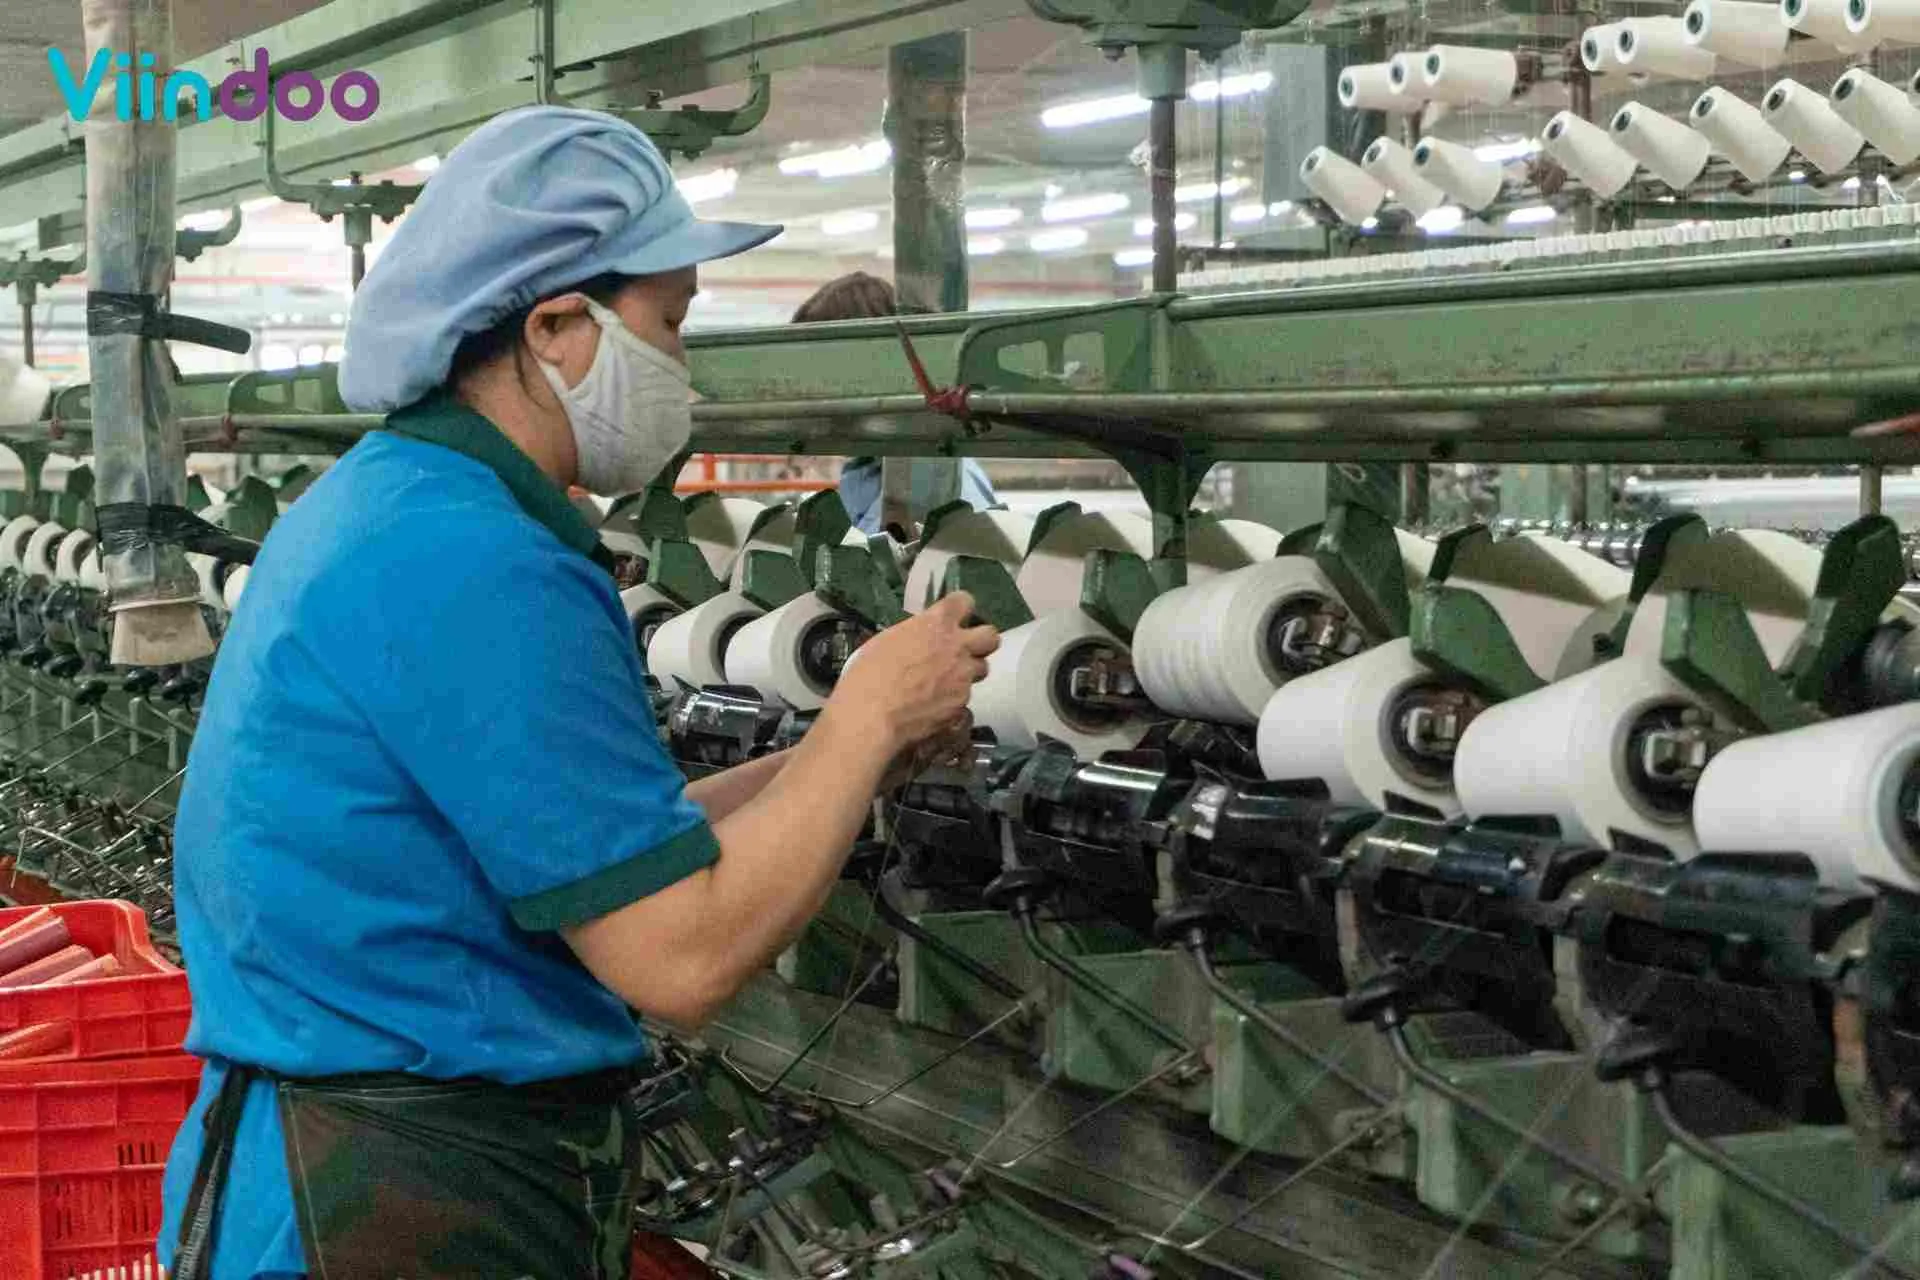 A stage in the Textile process at X20 Nam Dinh.